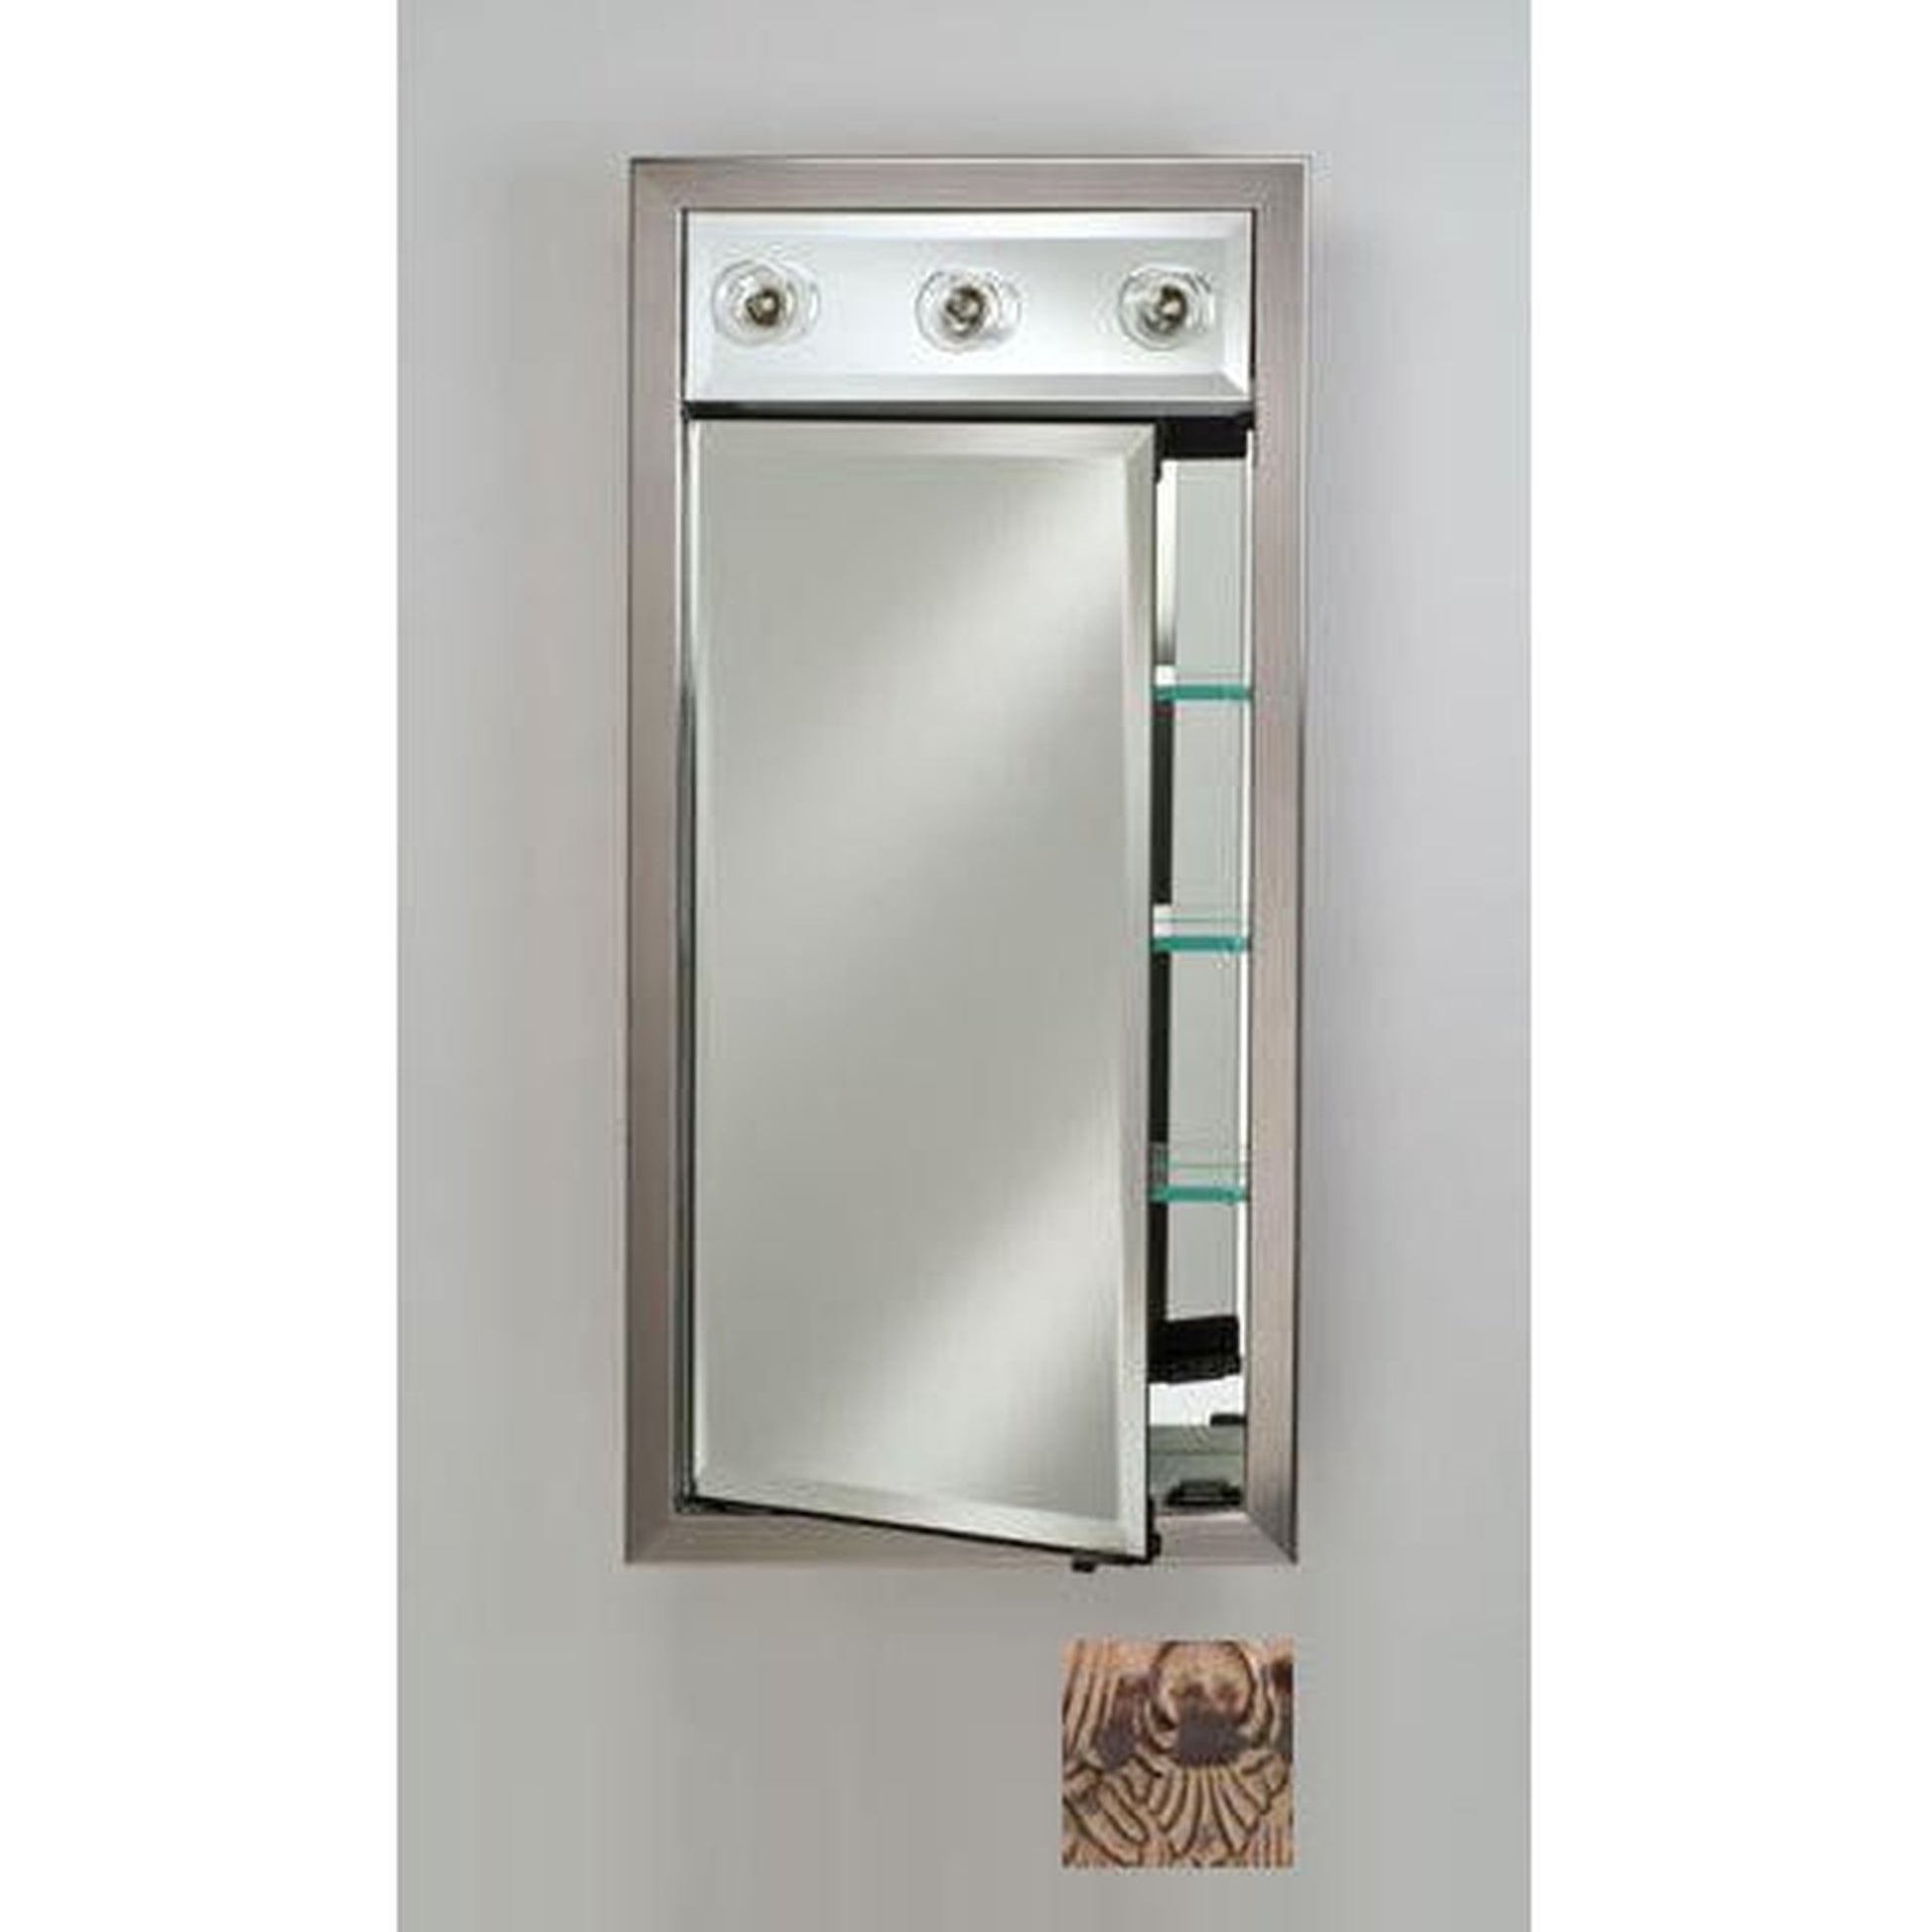 Afina Signature 17" x 30" Siena Antique Oiled Bronze Recessed Right Hinged Single Door Medicine Cabinet With Contemporary Lights